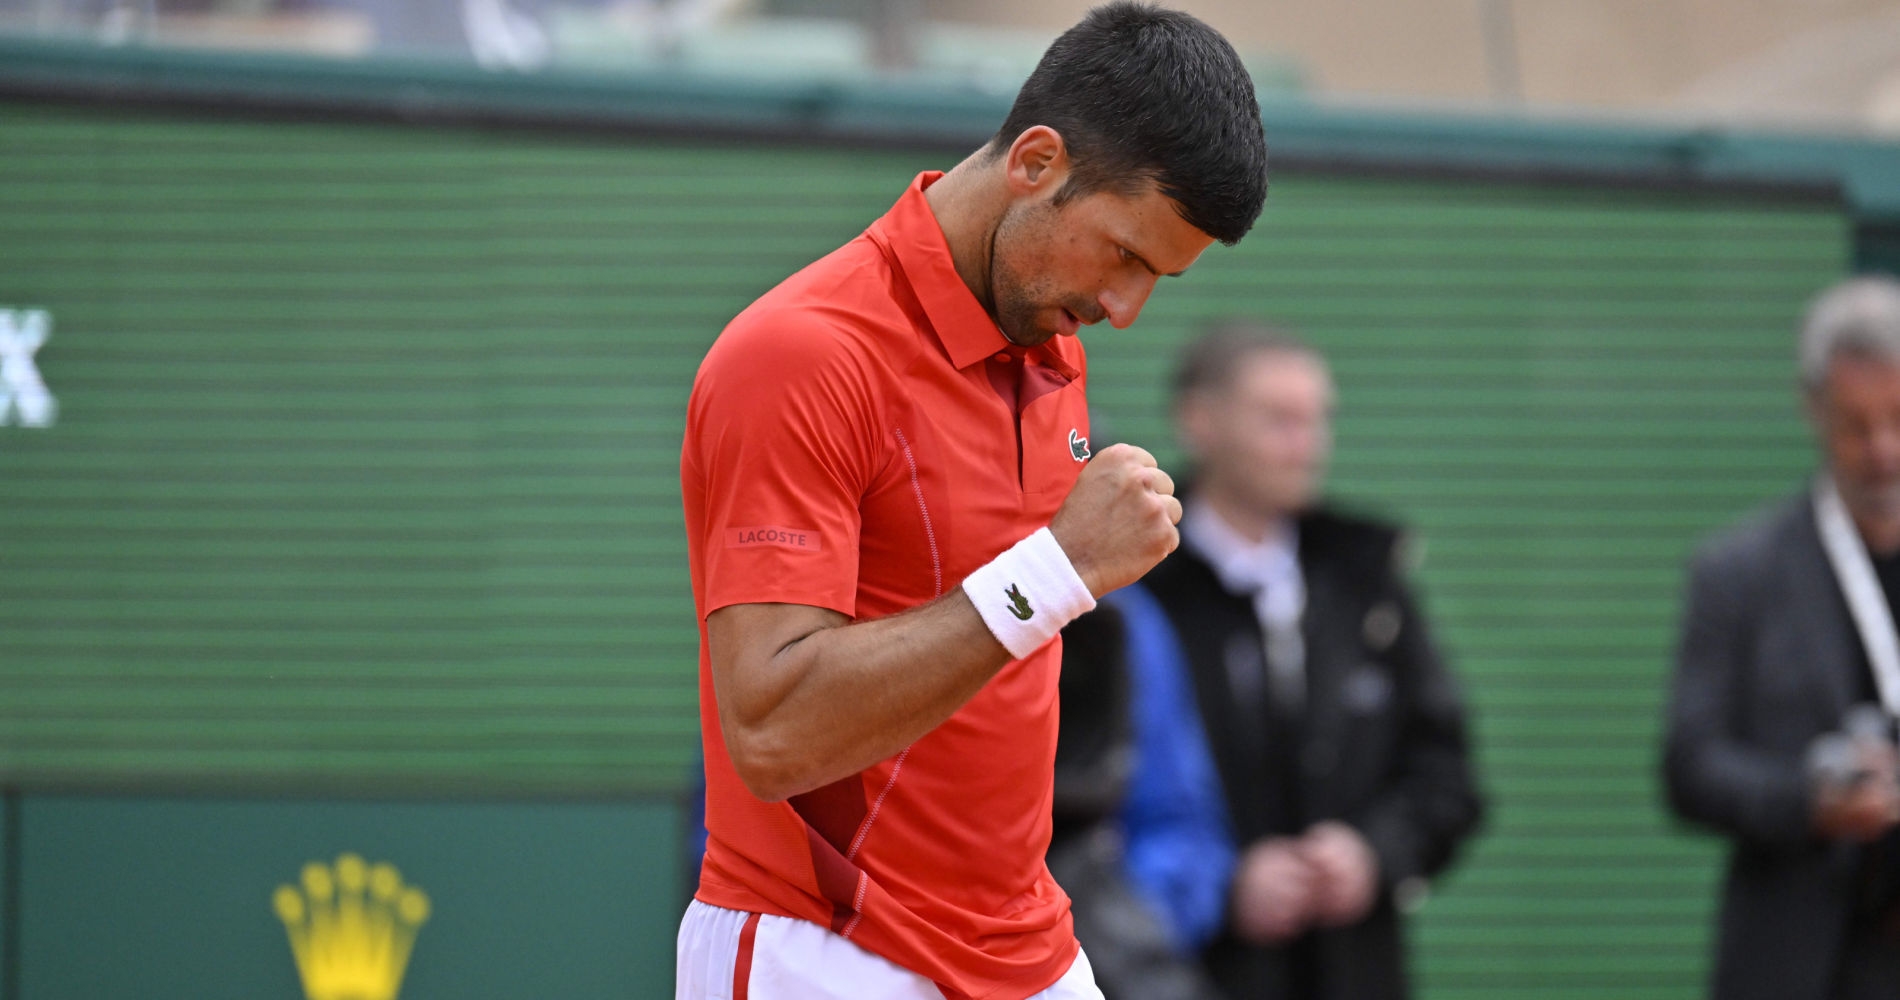 Djokovic avenges Musetti defeat from last year in MonteCarlo, reaches